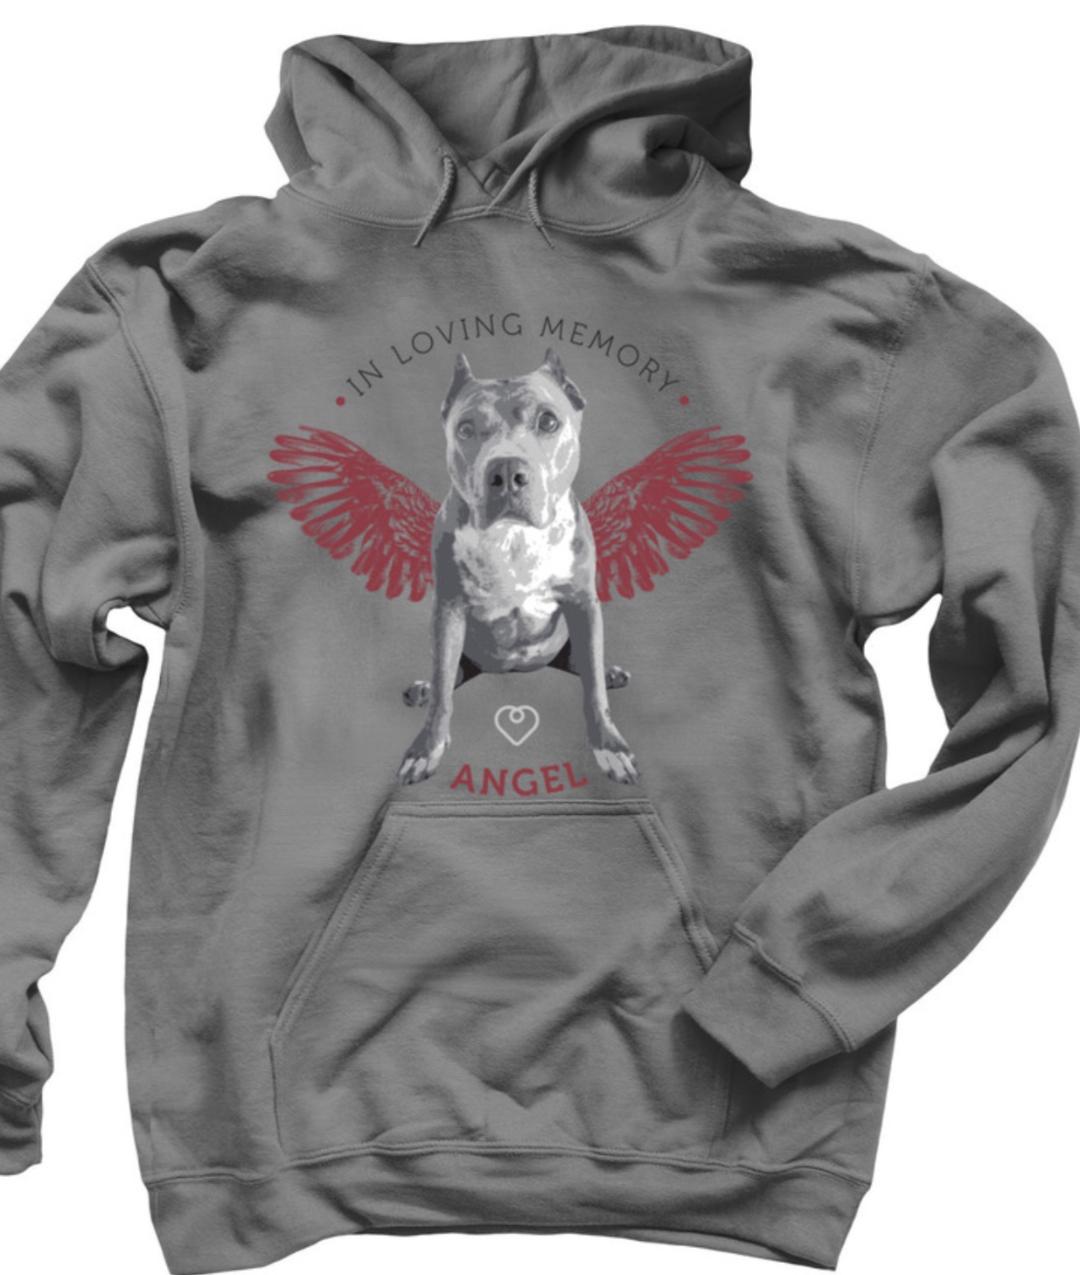 SPAY & NEUTER ANGEL DAY MERCH IS BACK!!